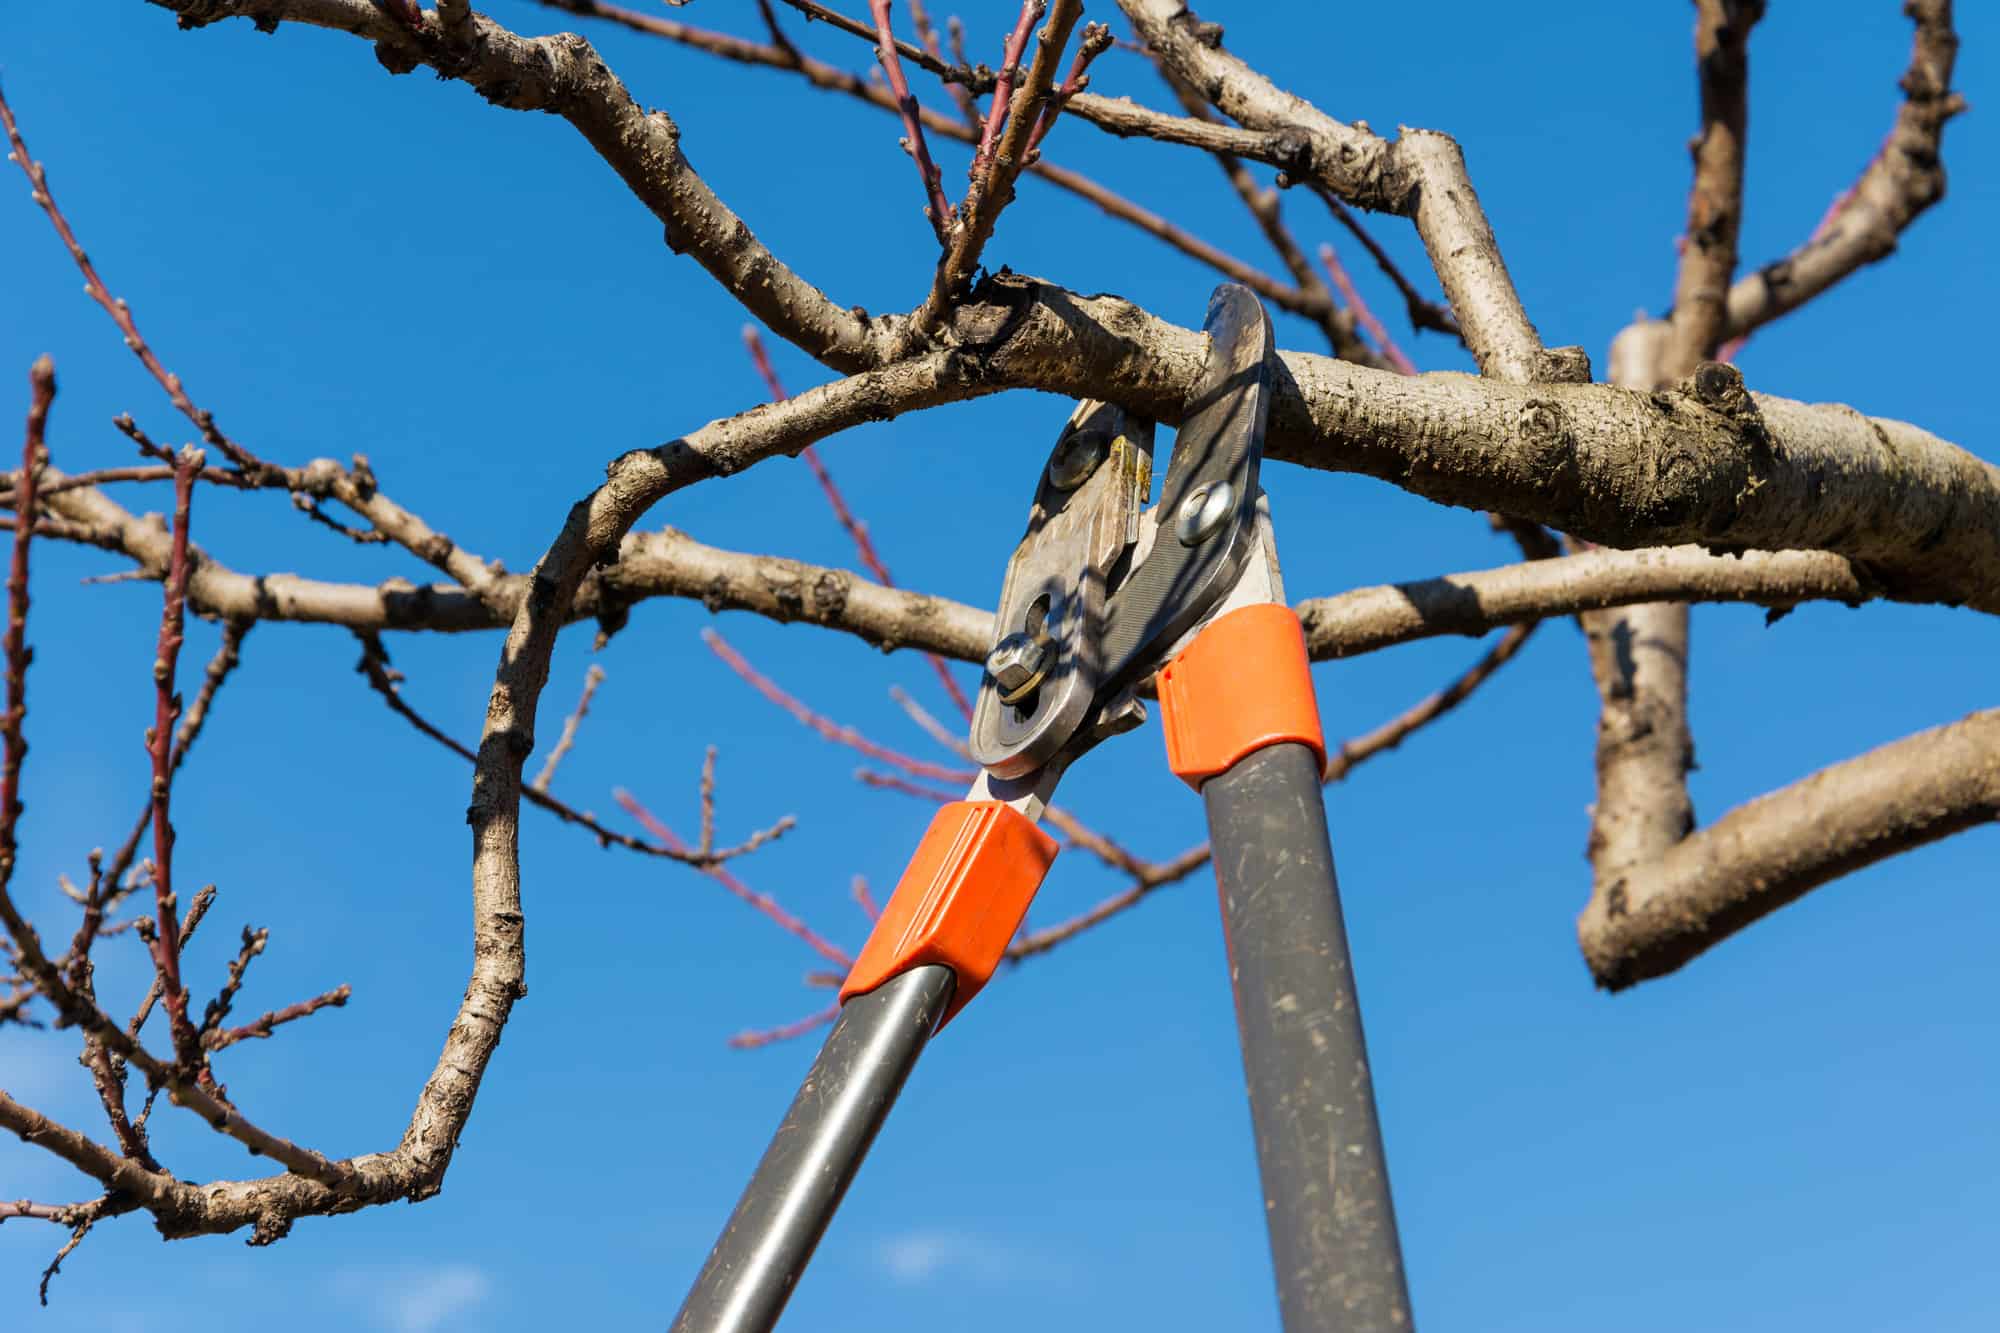 Gardening 101: Pruning Tools and How to Maintain Them